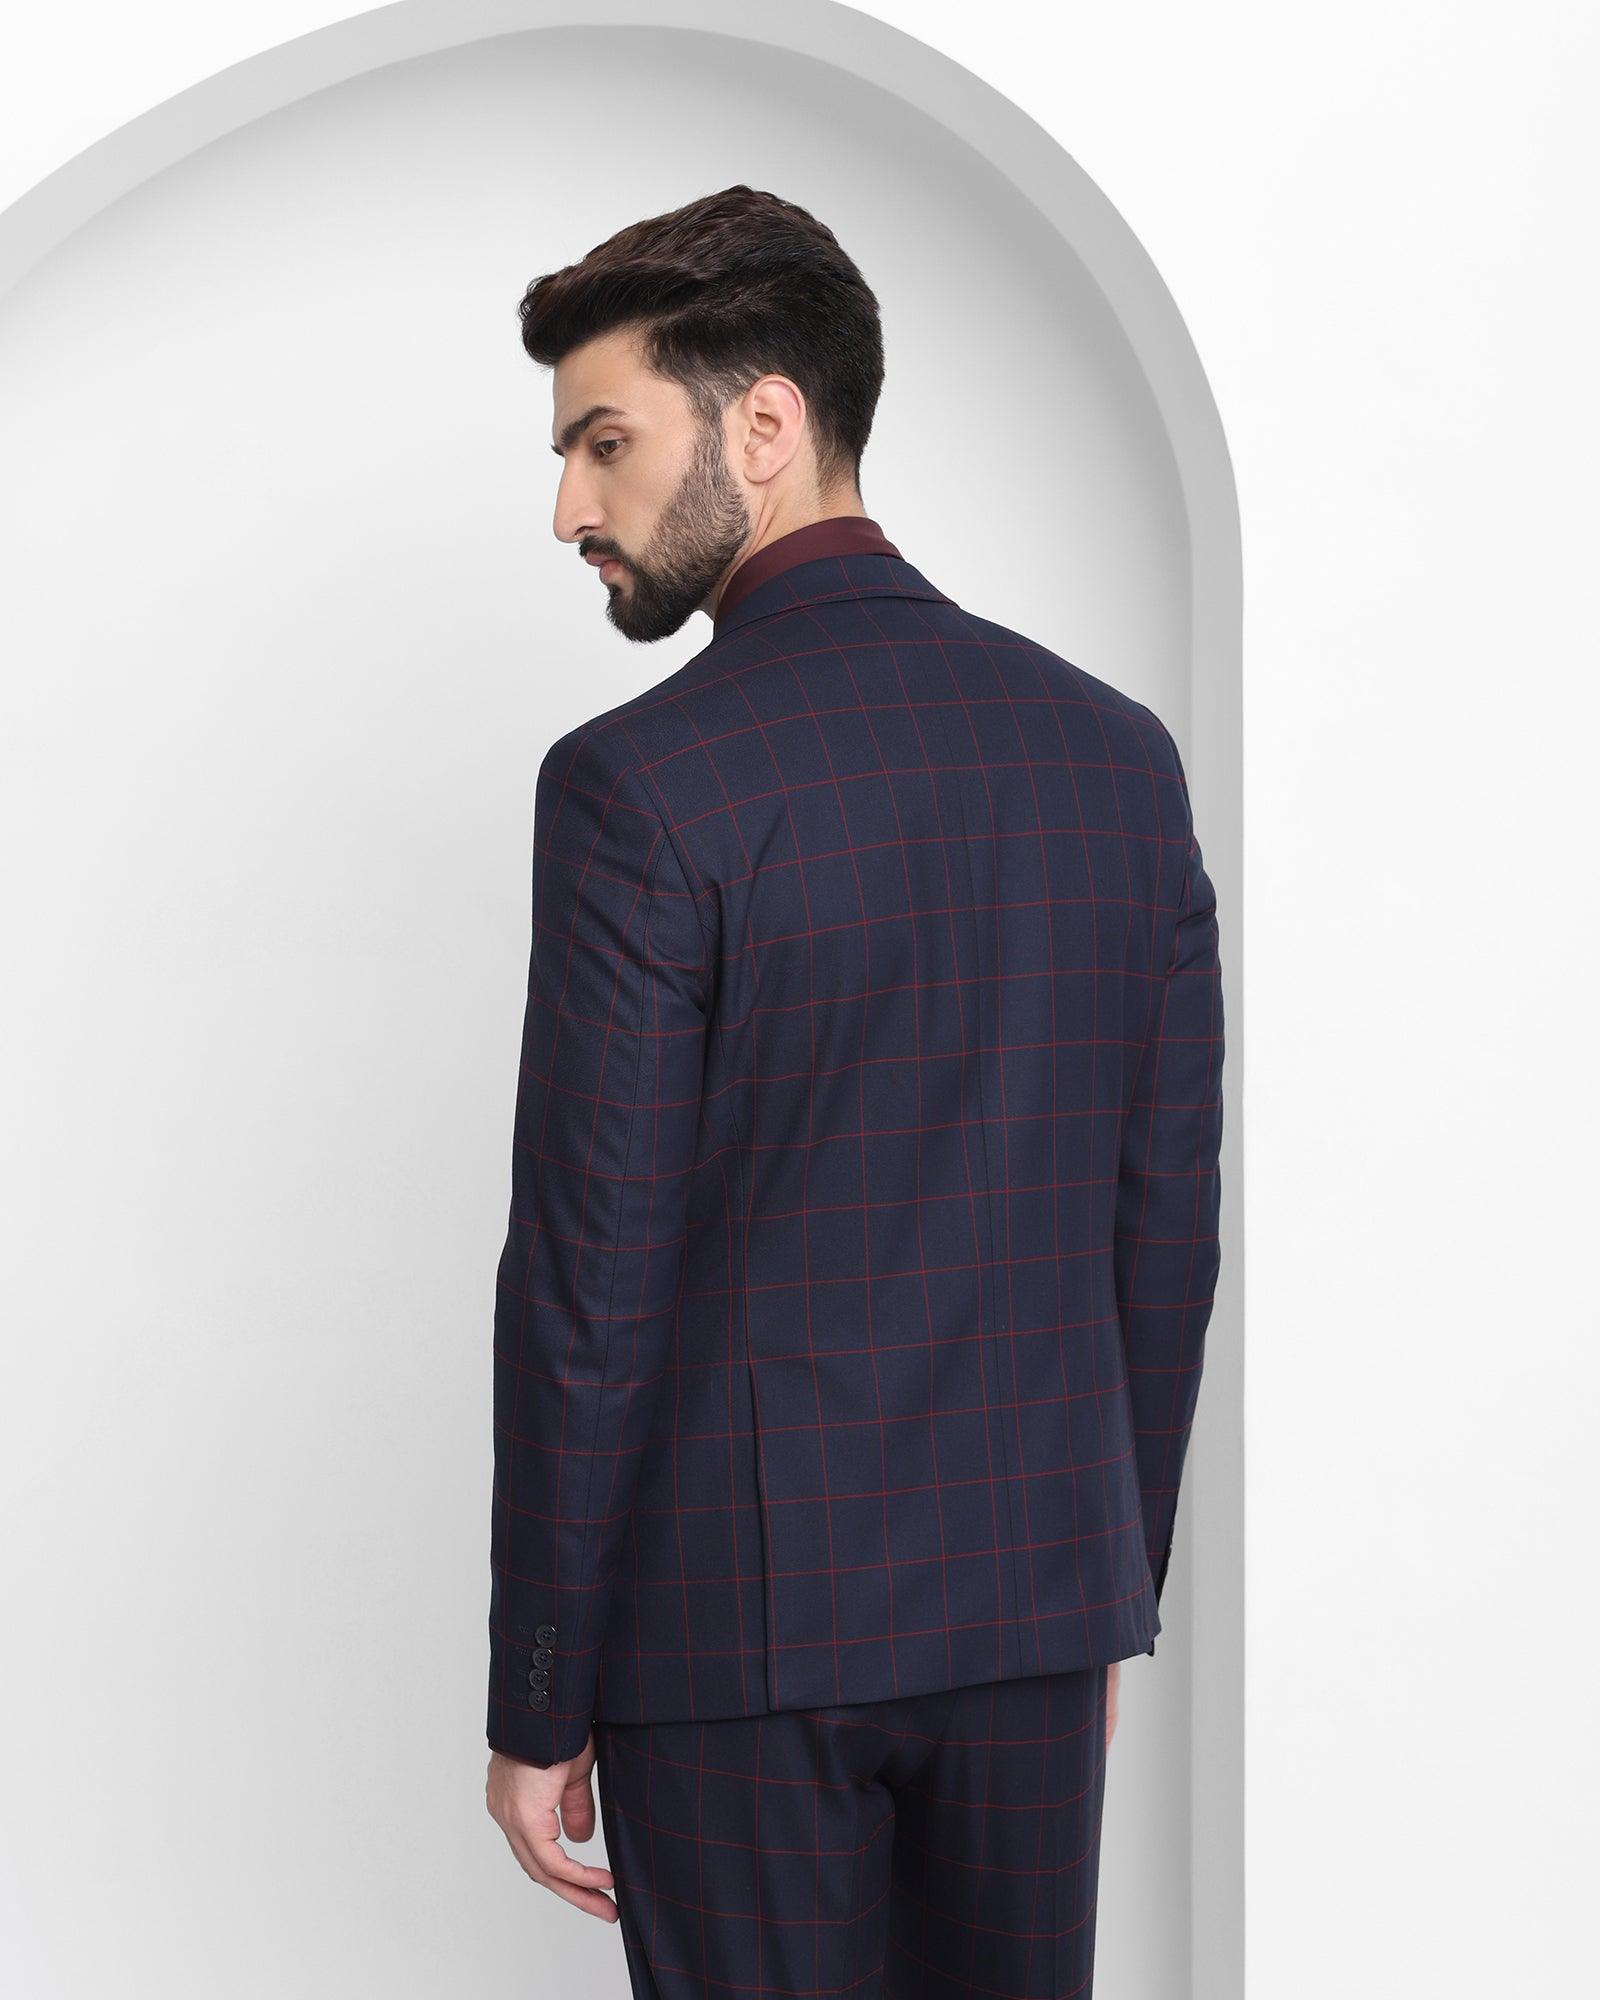 Two Piece Navy Check Formal Suit - Sylus